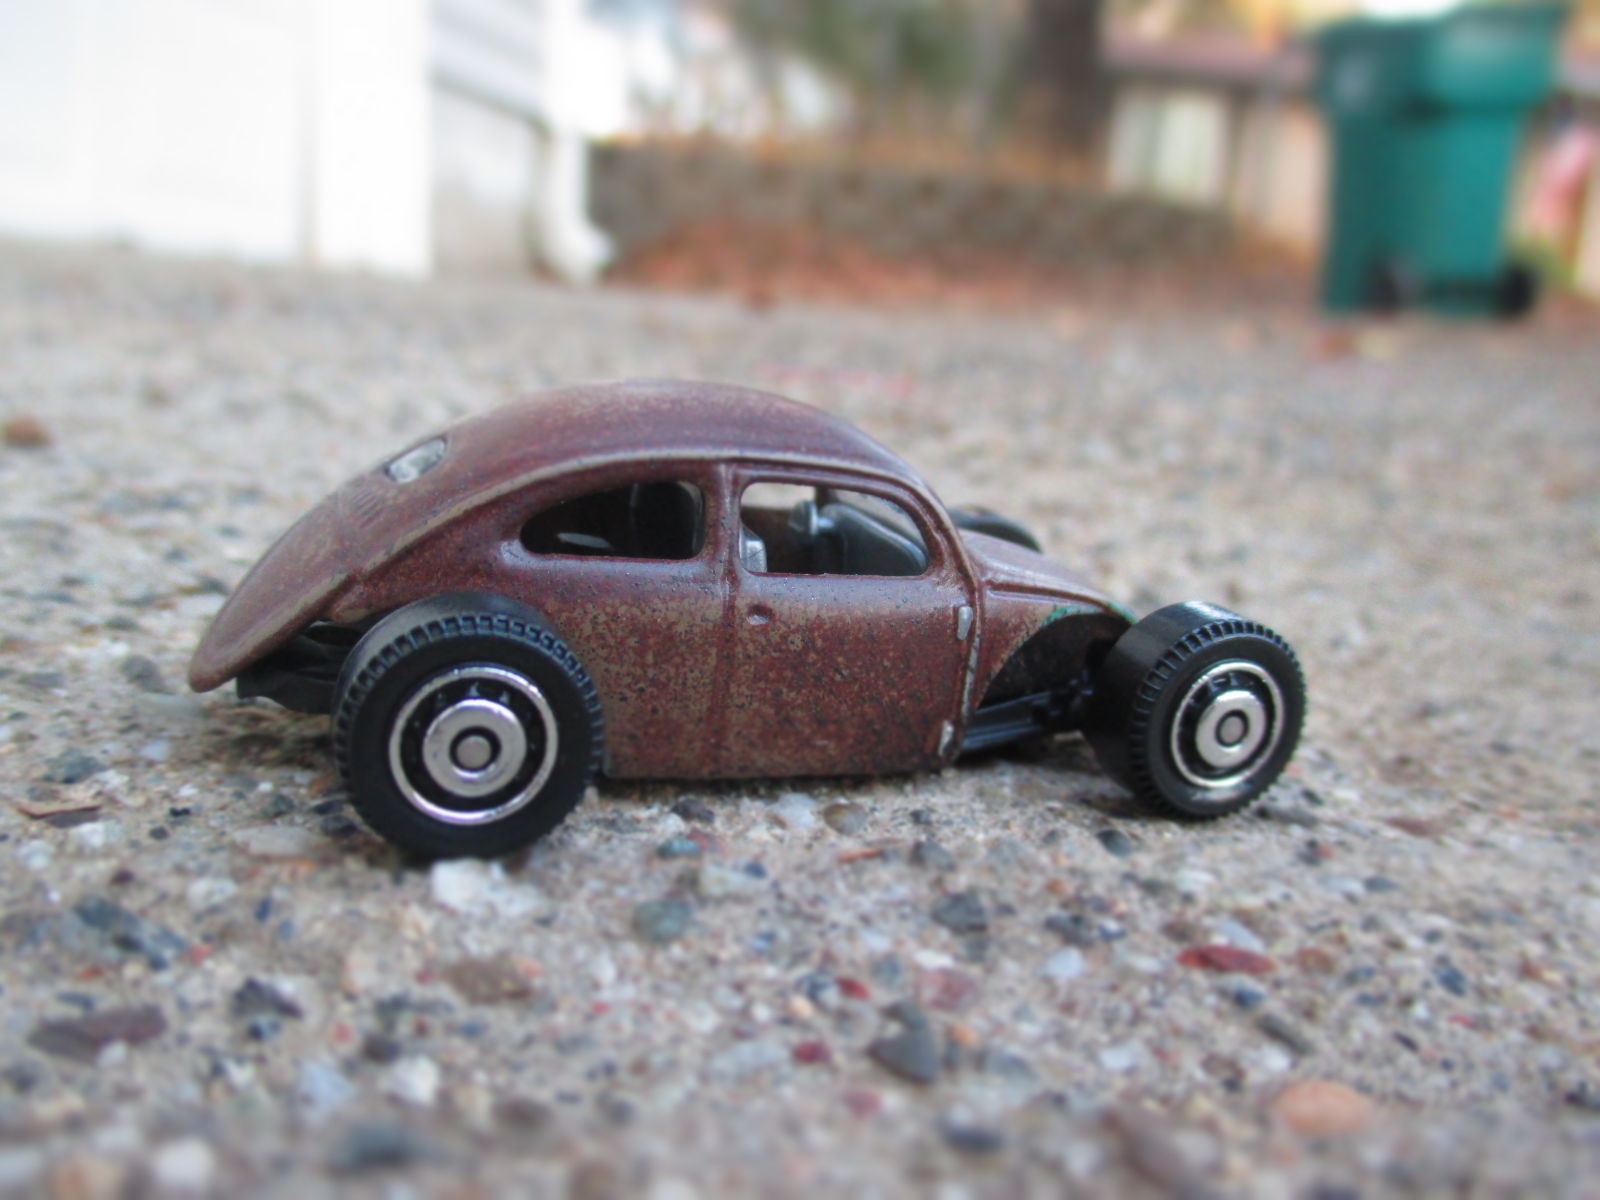 Illustration for article titled Volks Rod Beetle: How to